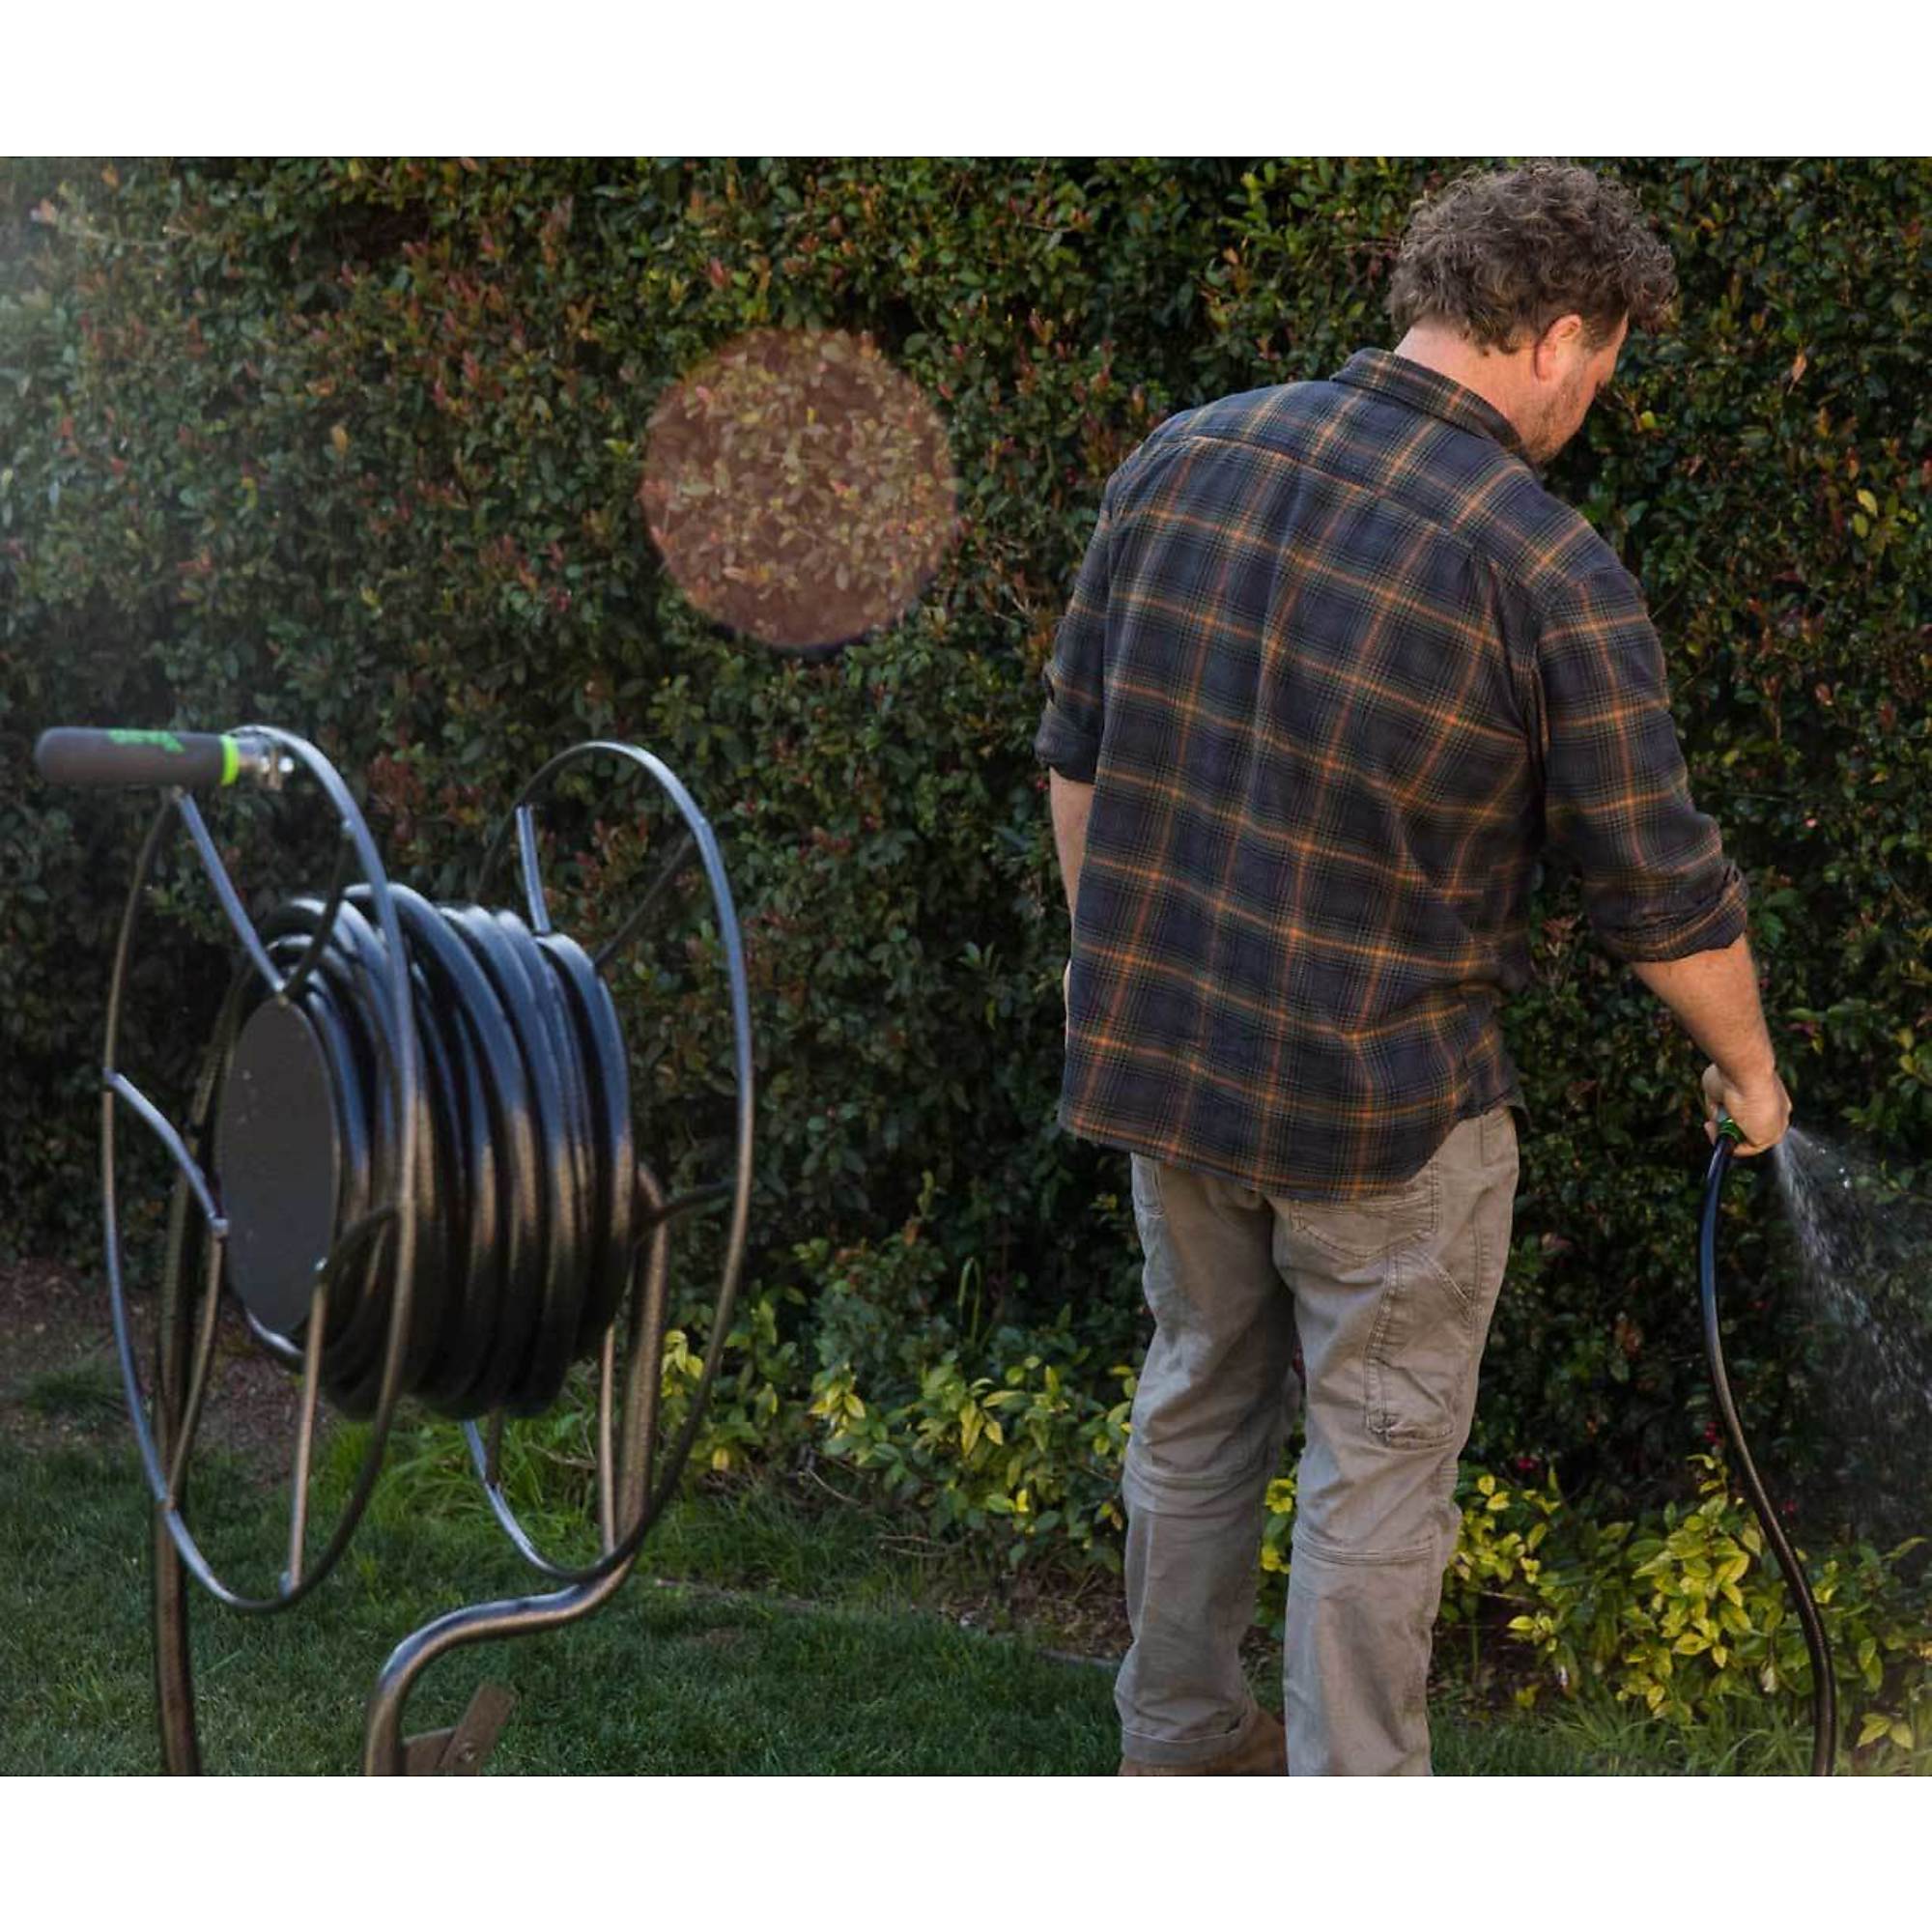 Yard Butler Free Standing Swivel Hose Reel - Water Hose Caddy For